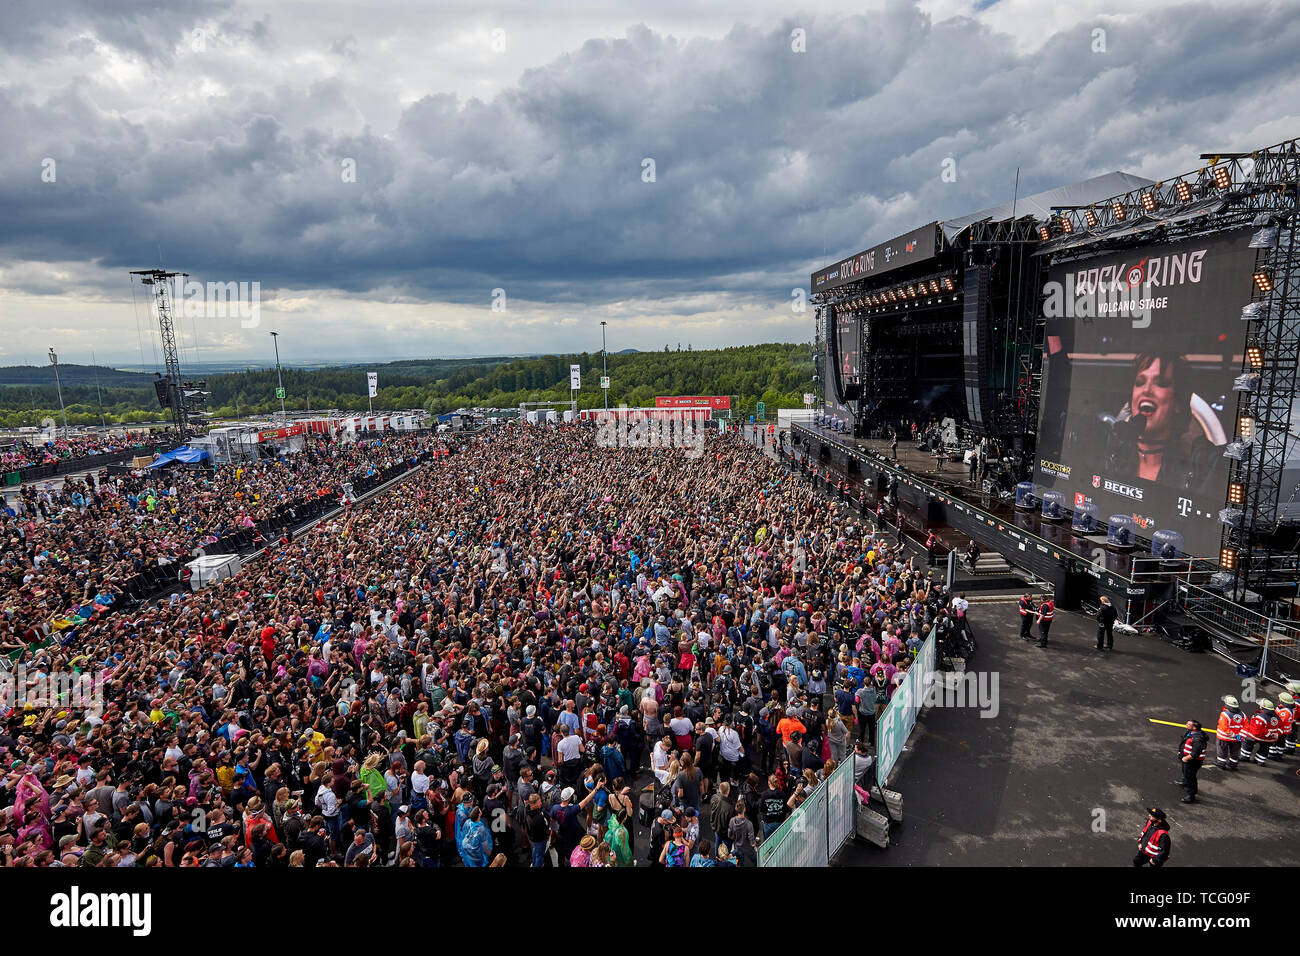 At least eight people struck by lightning at Rock am Ring festival in  Germany – New York Daily News